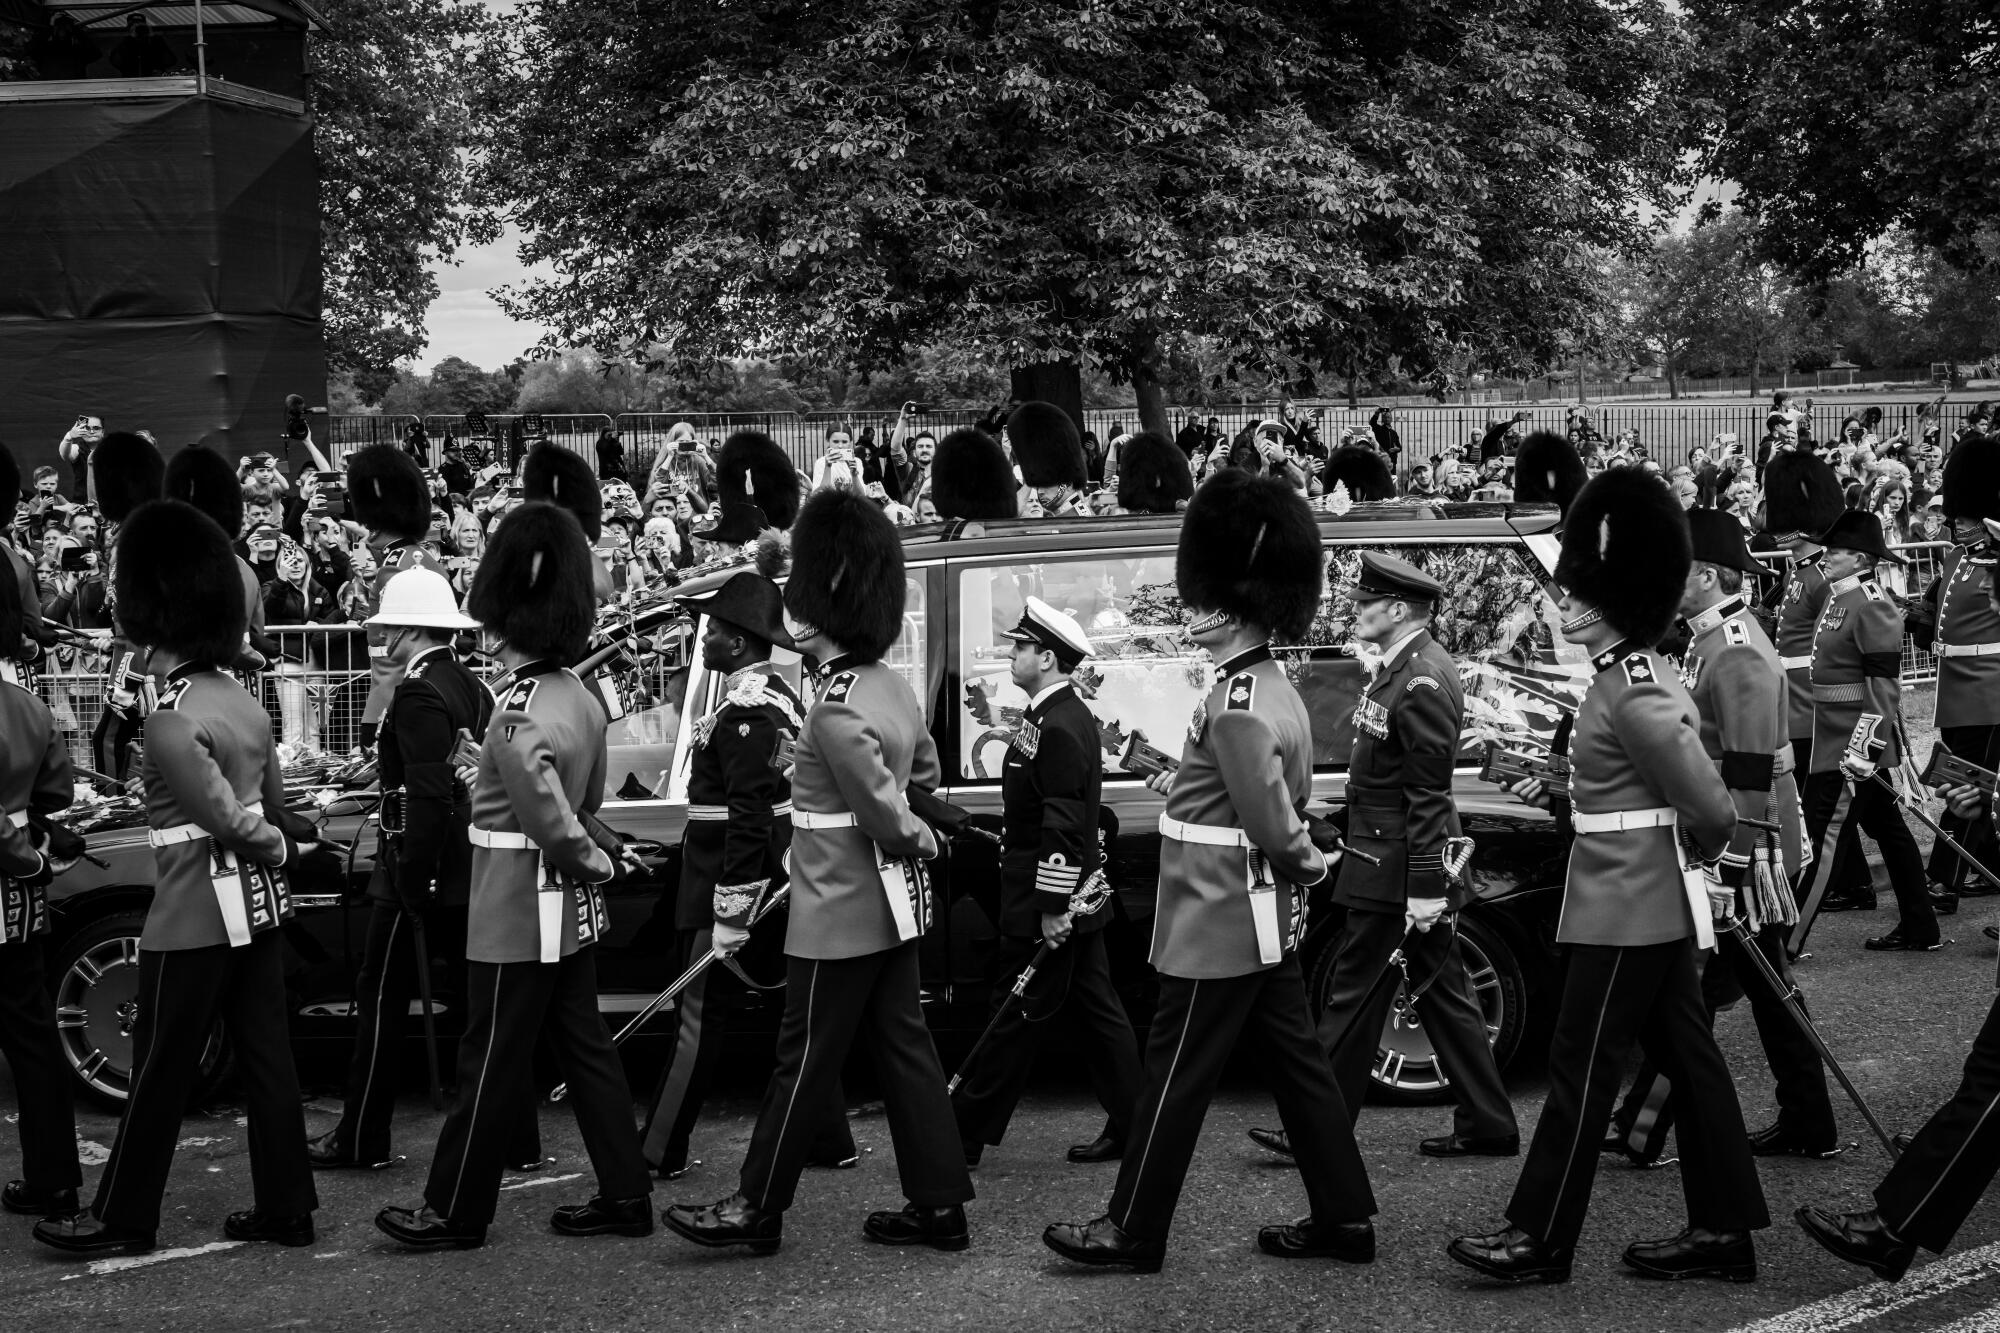 A funeral procession bearing the coffin of Queen Elizabeth II makes its way towards the road leading to Windsor Castle.